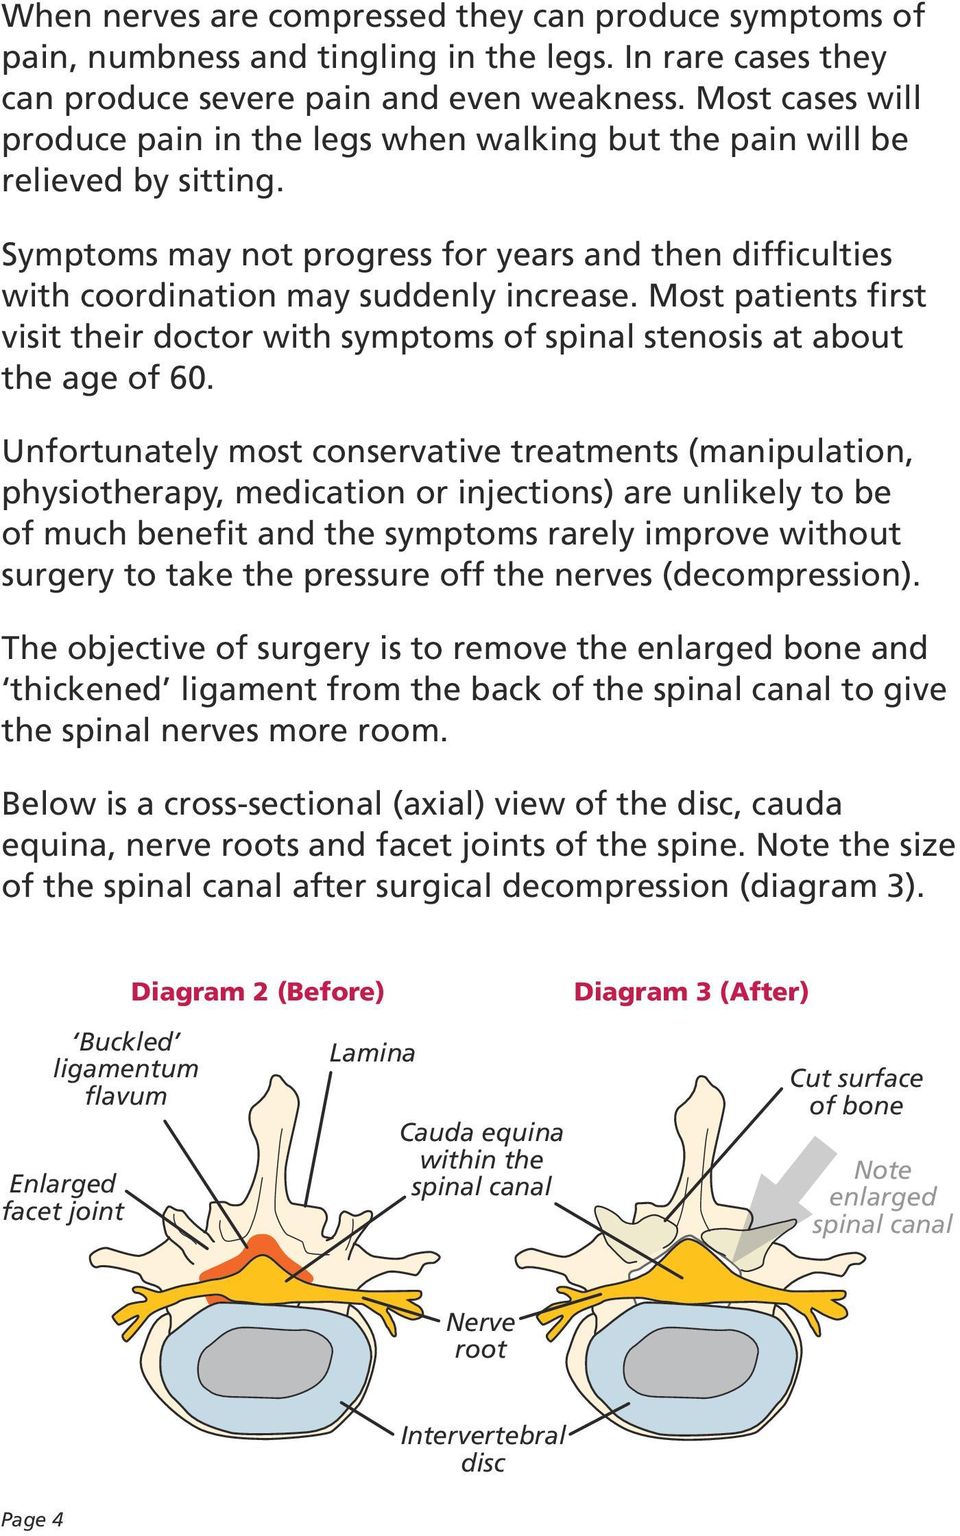 Most patients first visit their doctor with symptoms of spinal stenosis at about the age of 60.